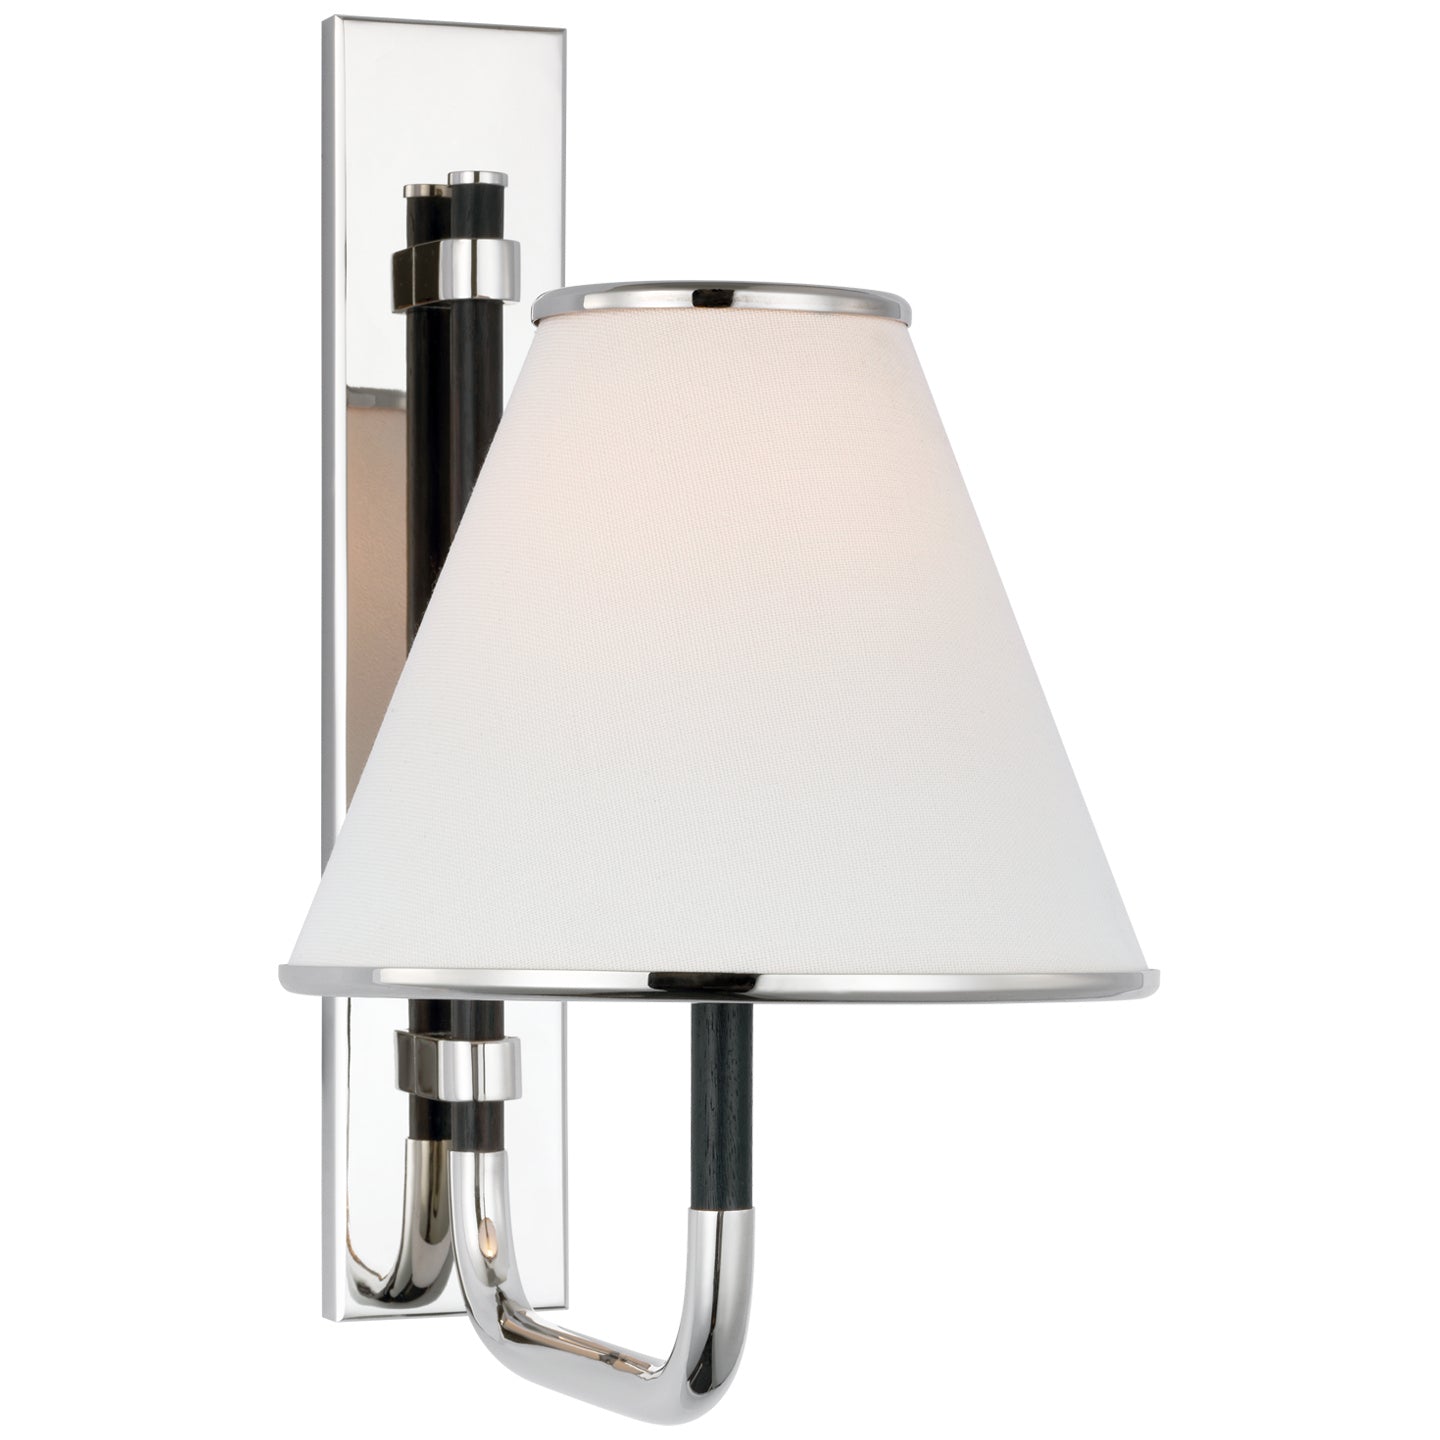 Visual Comfort Signature - MF 2055PN/EB-L - LED Wall Sconce - Rigby - Polished Nickel and Ebony